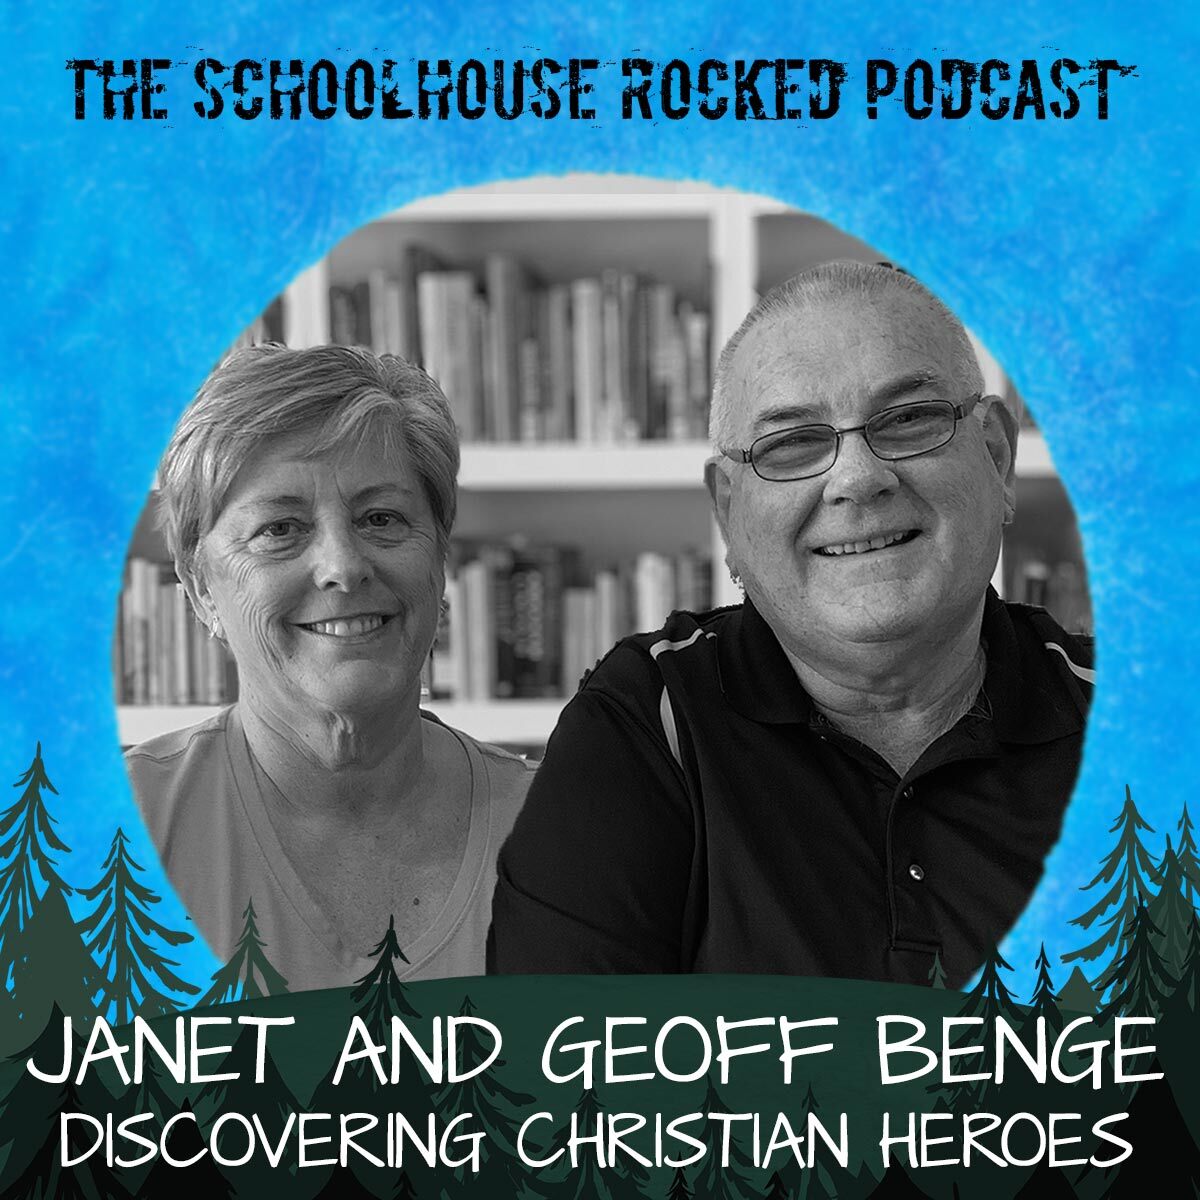 Janet and Geoff Benge - Discovering Christian Heroes